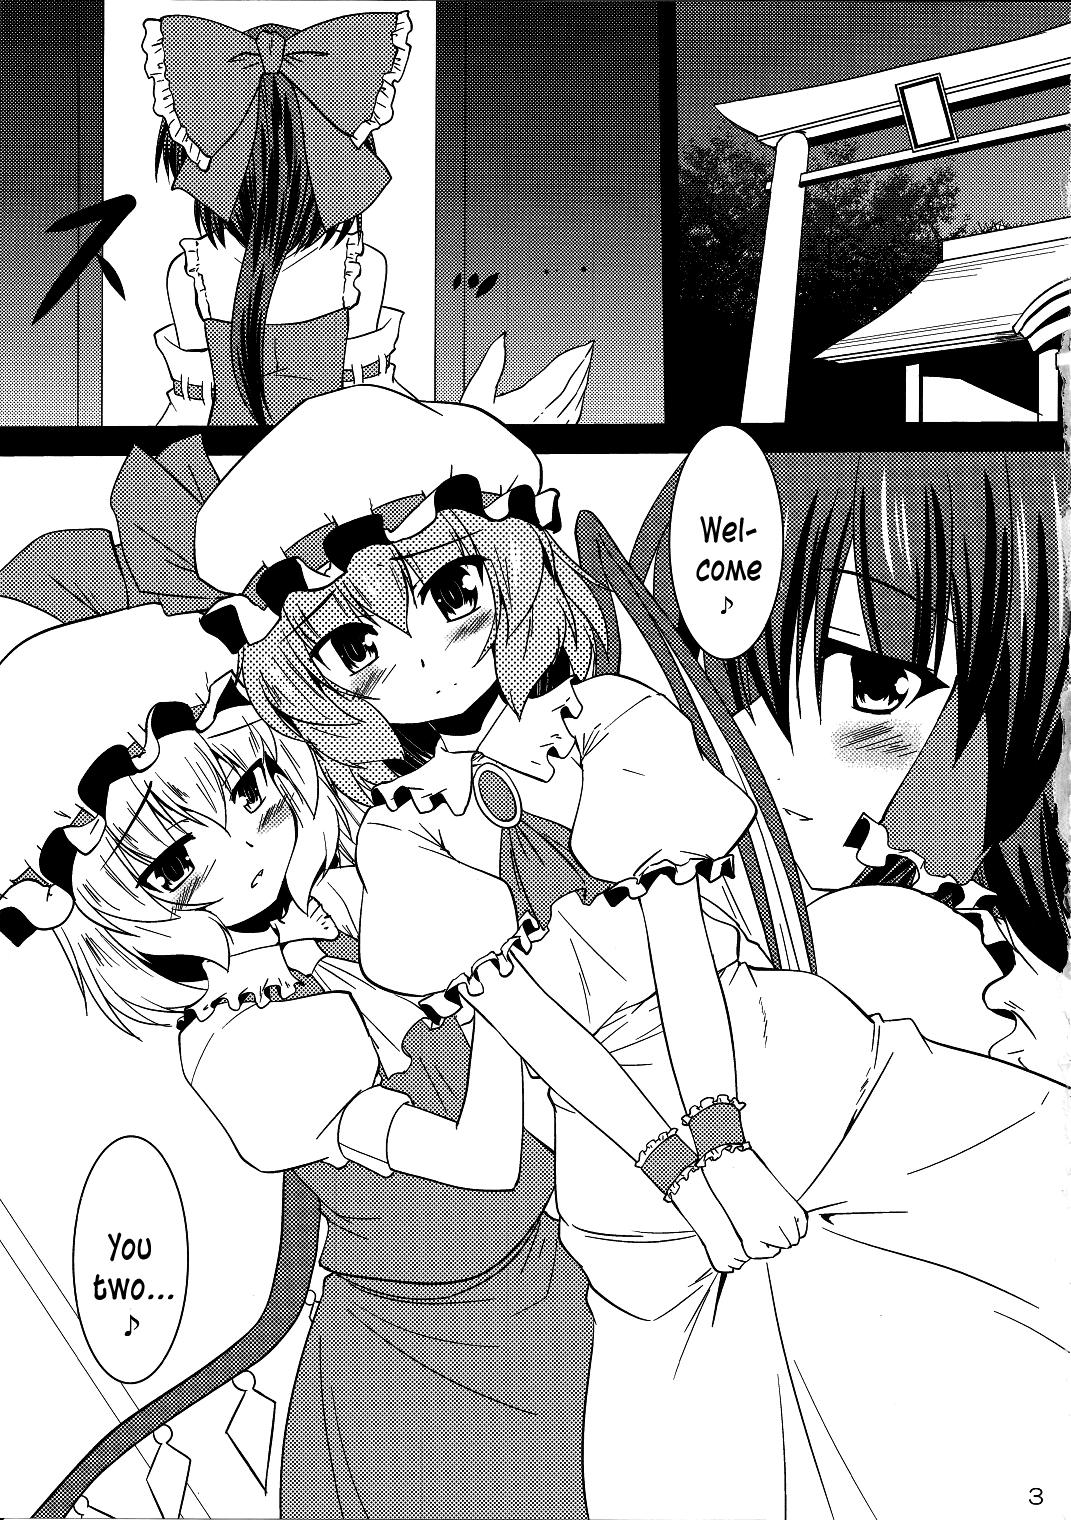 With Vampire Breaking - Touhou project Nudity - Page 2